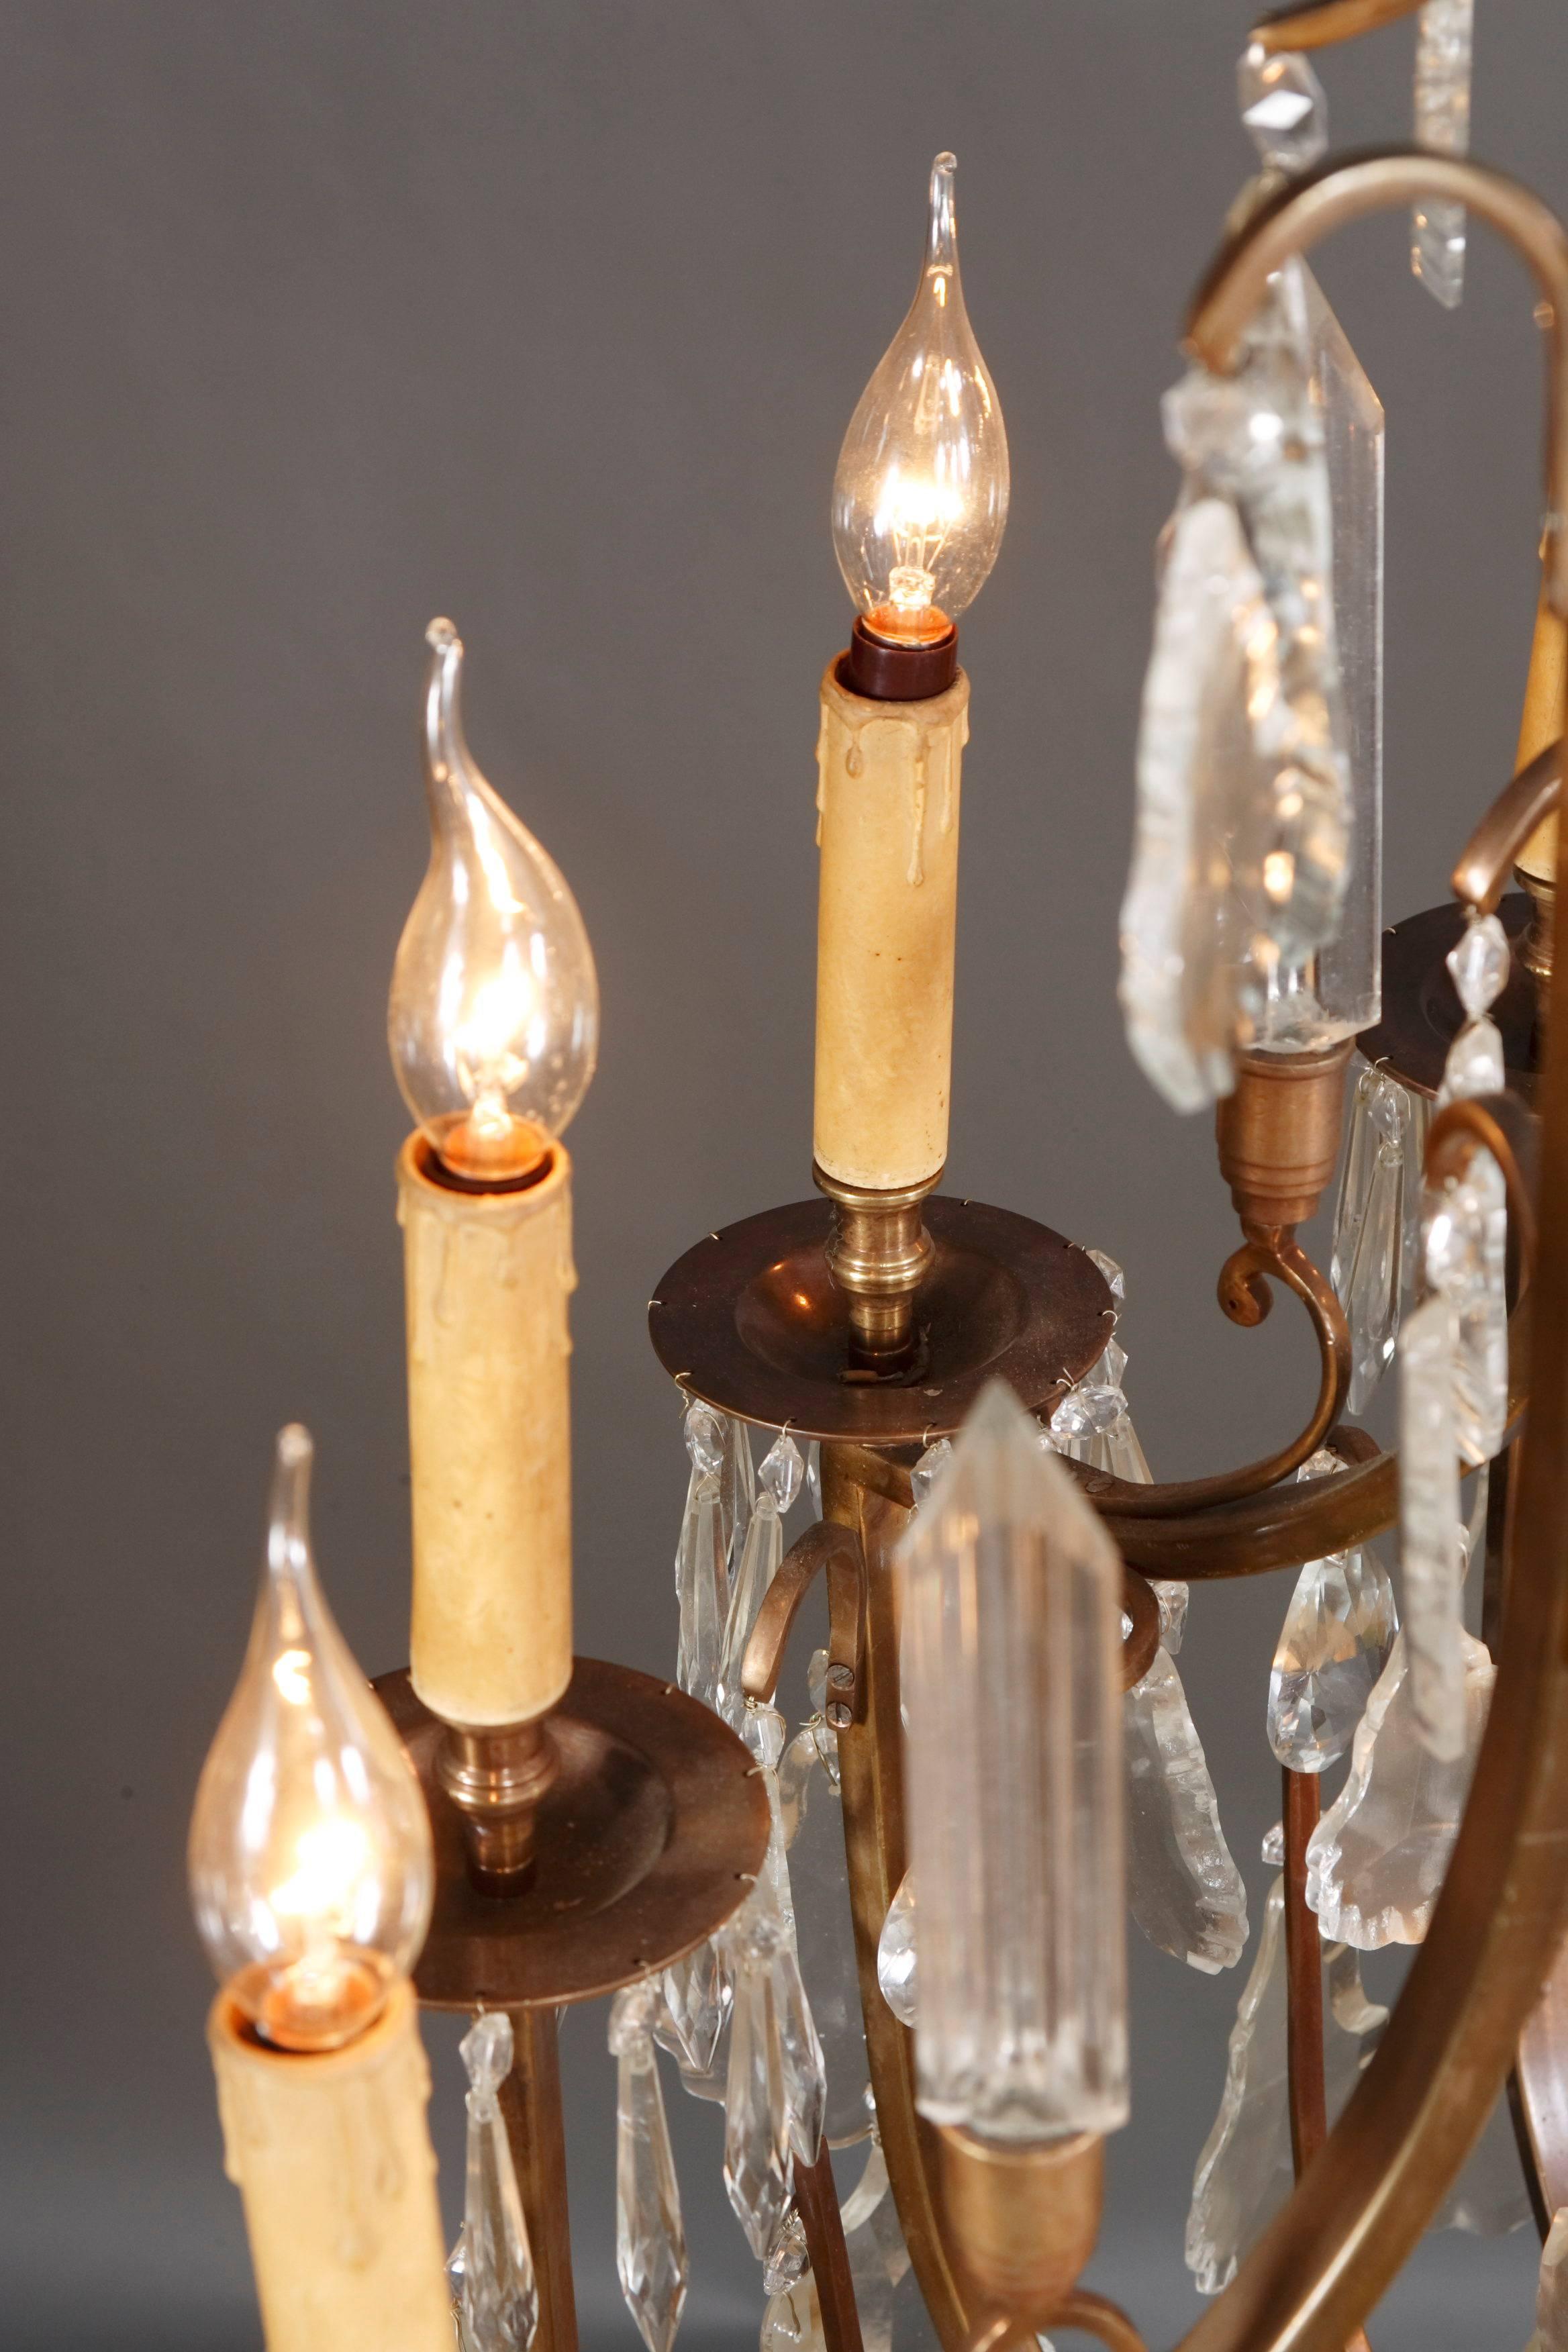 High pear-shaped body. Multi-curved Korbgestänge. In the center ascending, multiple articulated baluster-shaped glass shaft with multiple crowning. Brass, chased. Twelve outboard flames and six polished glass obelisks. Candle-shaped pods made of